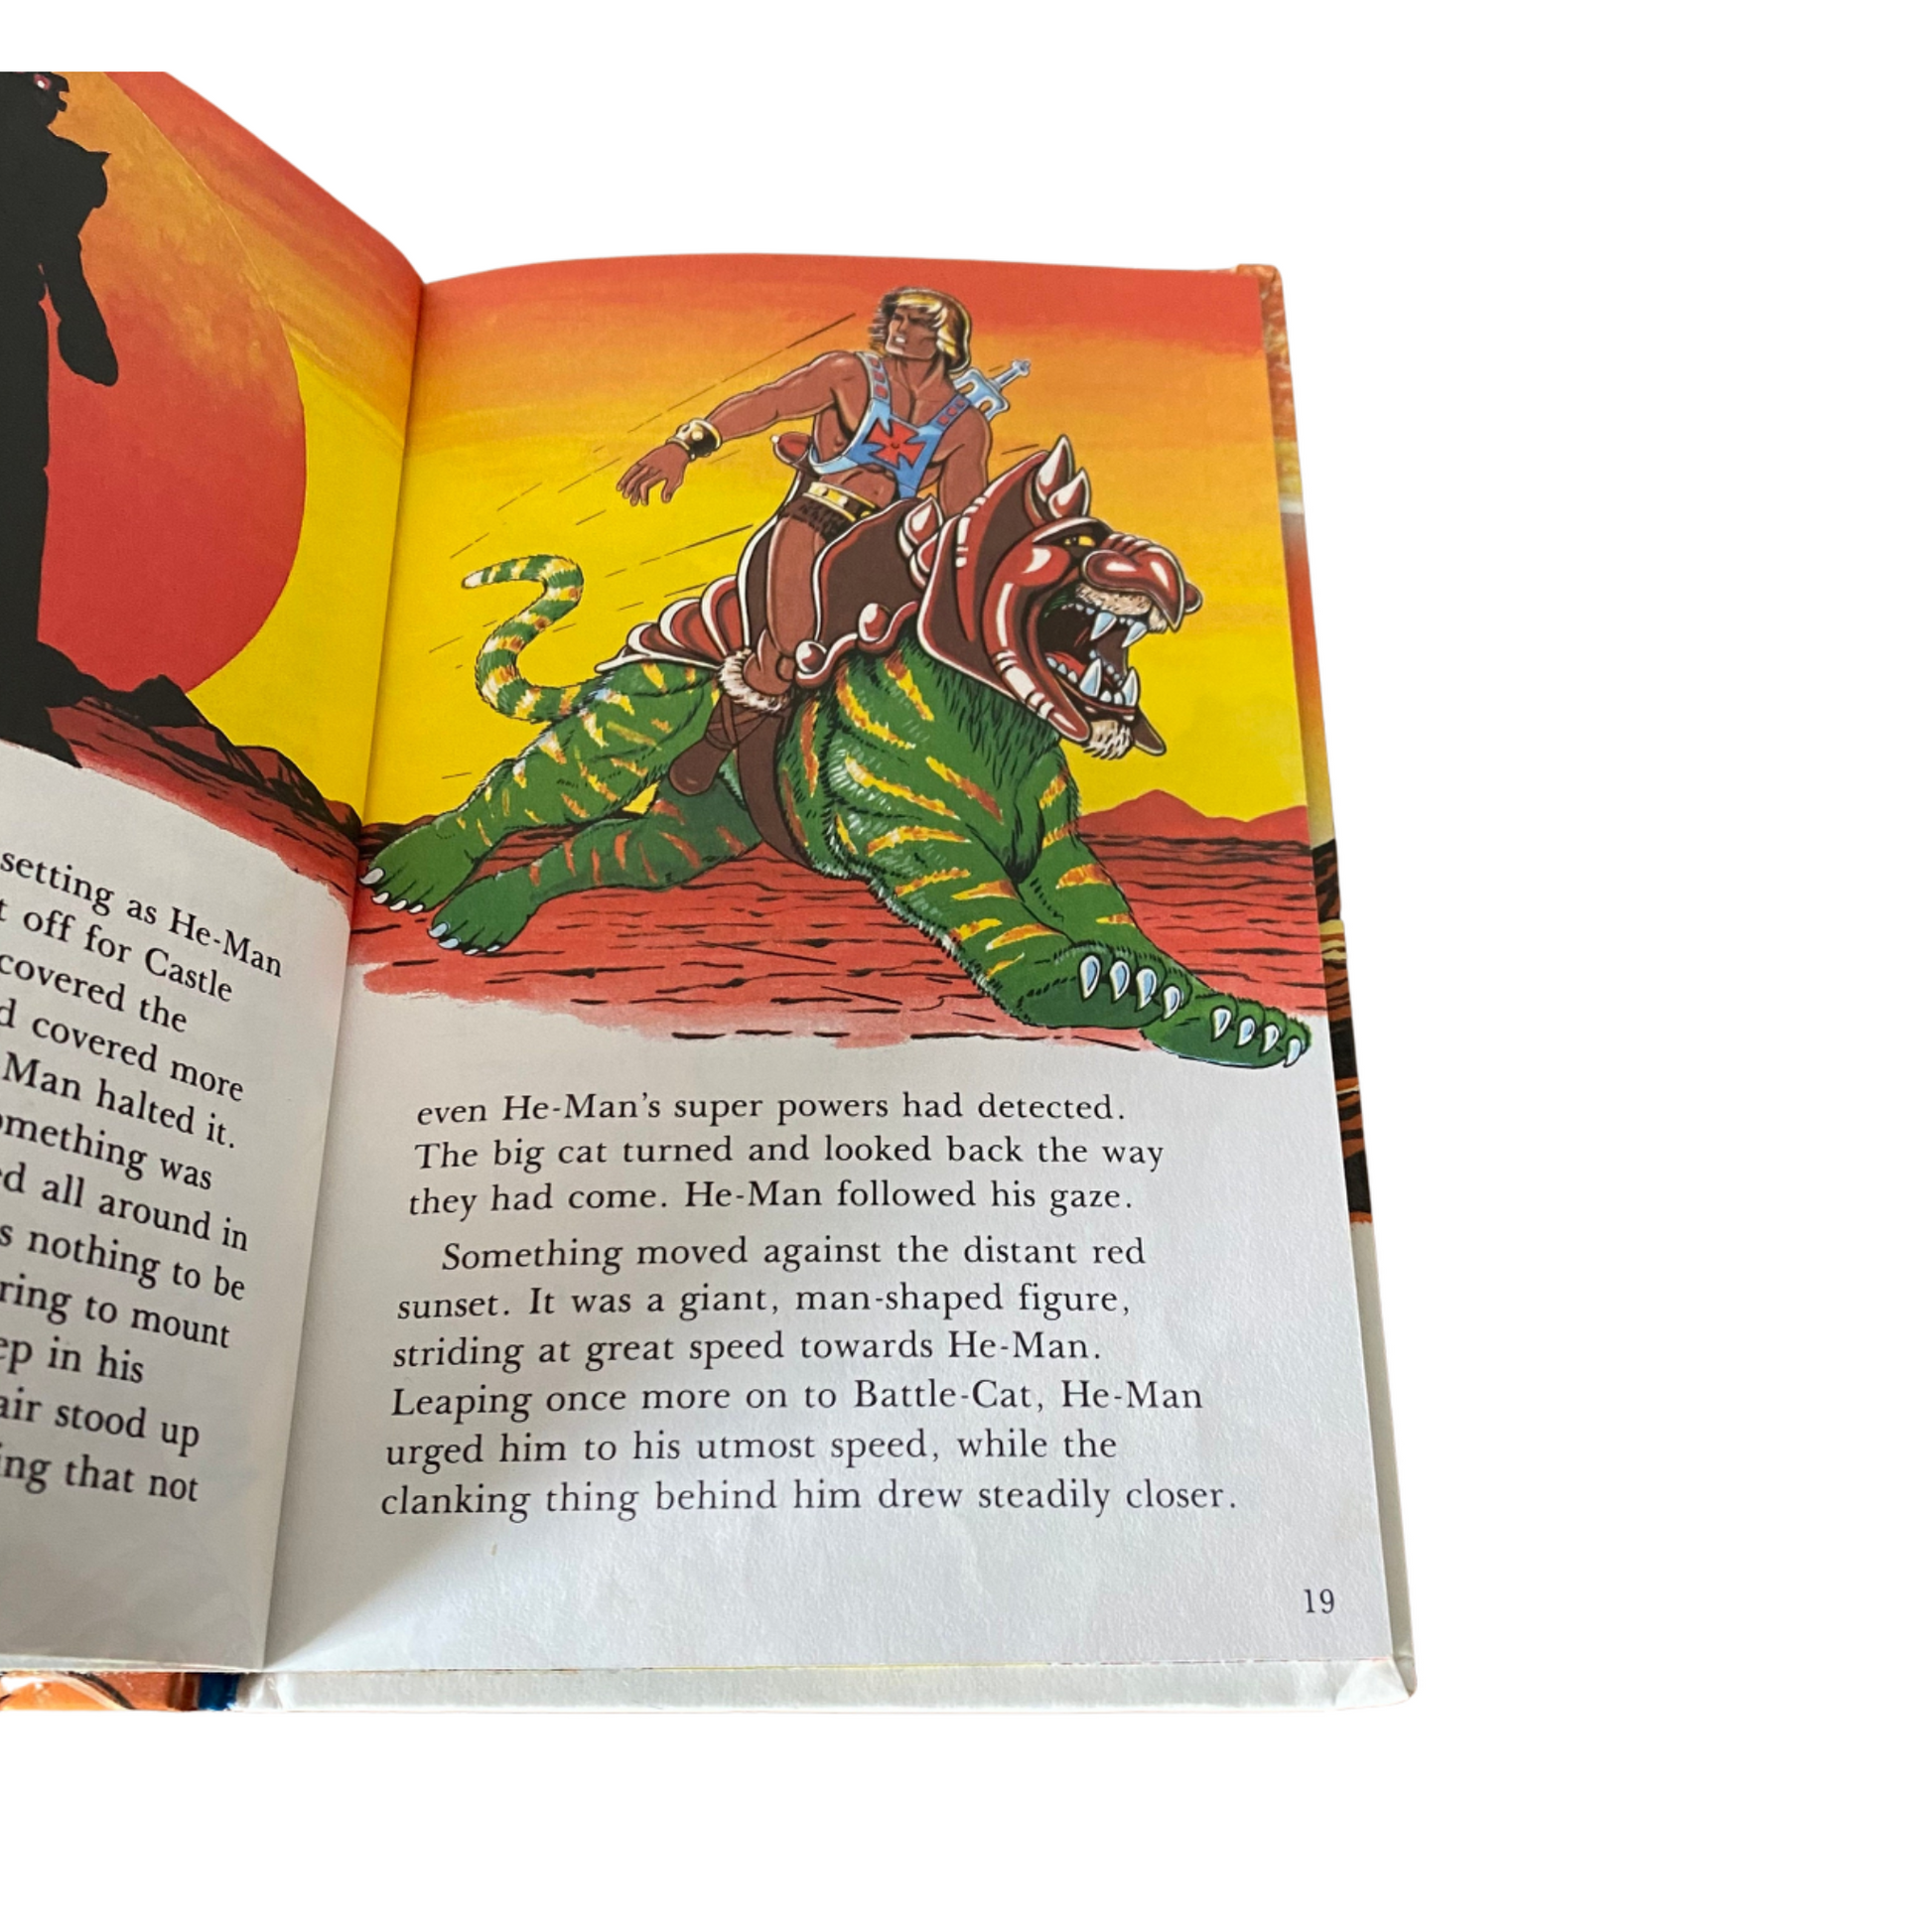 First edition He-Man story book printed in England by John Grant